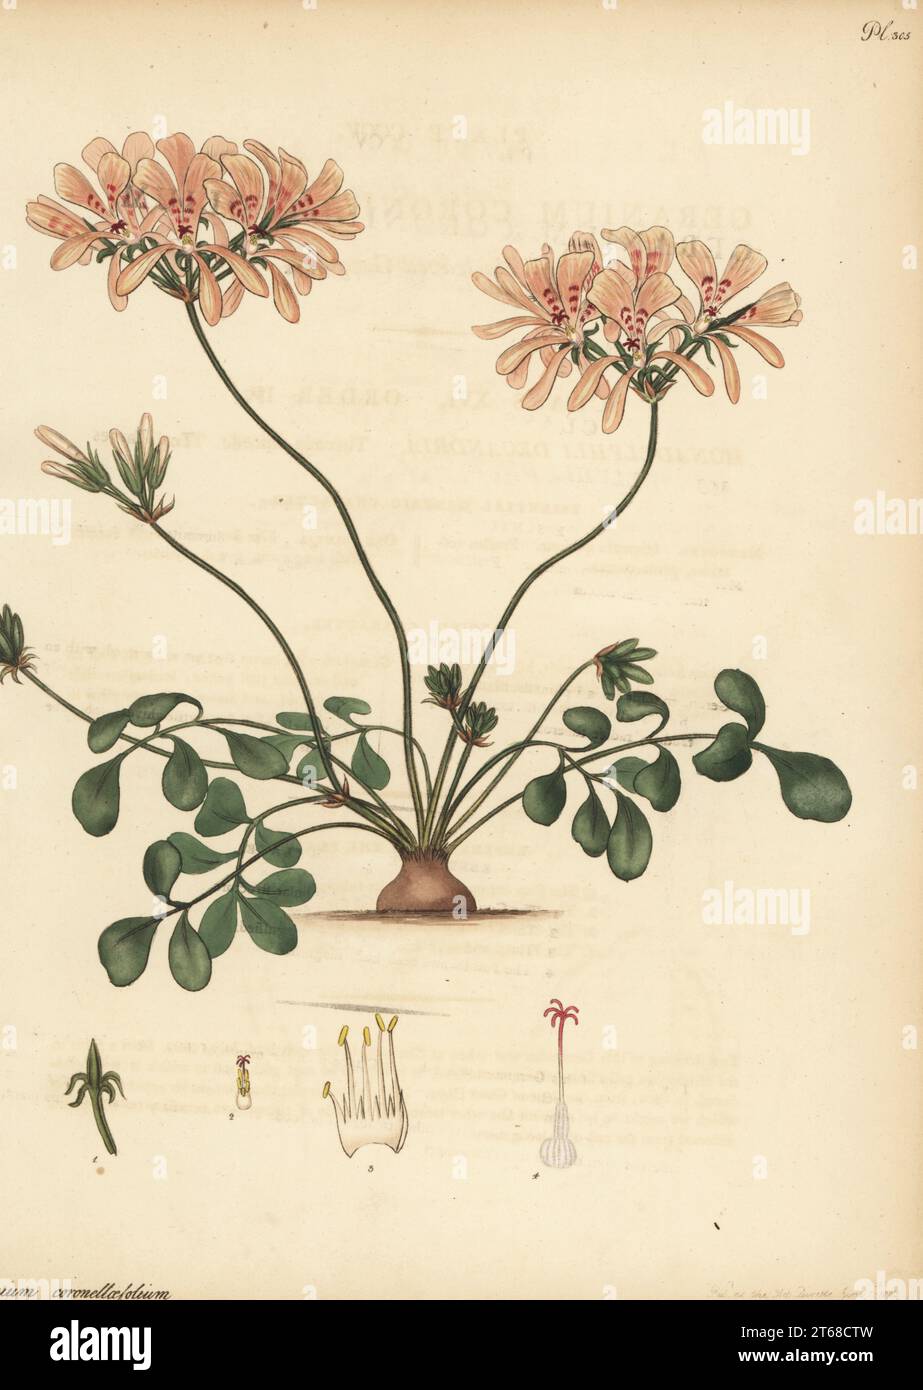 Pelargonium pinnatum. Coronilla-leaved geranium, Geranium coronillaefolium. From the Cape of Good Hope, South Africa, in the George Hibbert collection. Copperplate engraving drawn, engraved and hand-coloured by Henry Andrews from his Botanical Register, Volume 5, self-published in Knightsbridge, London, 1803. Stock Photo